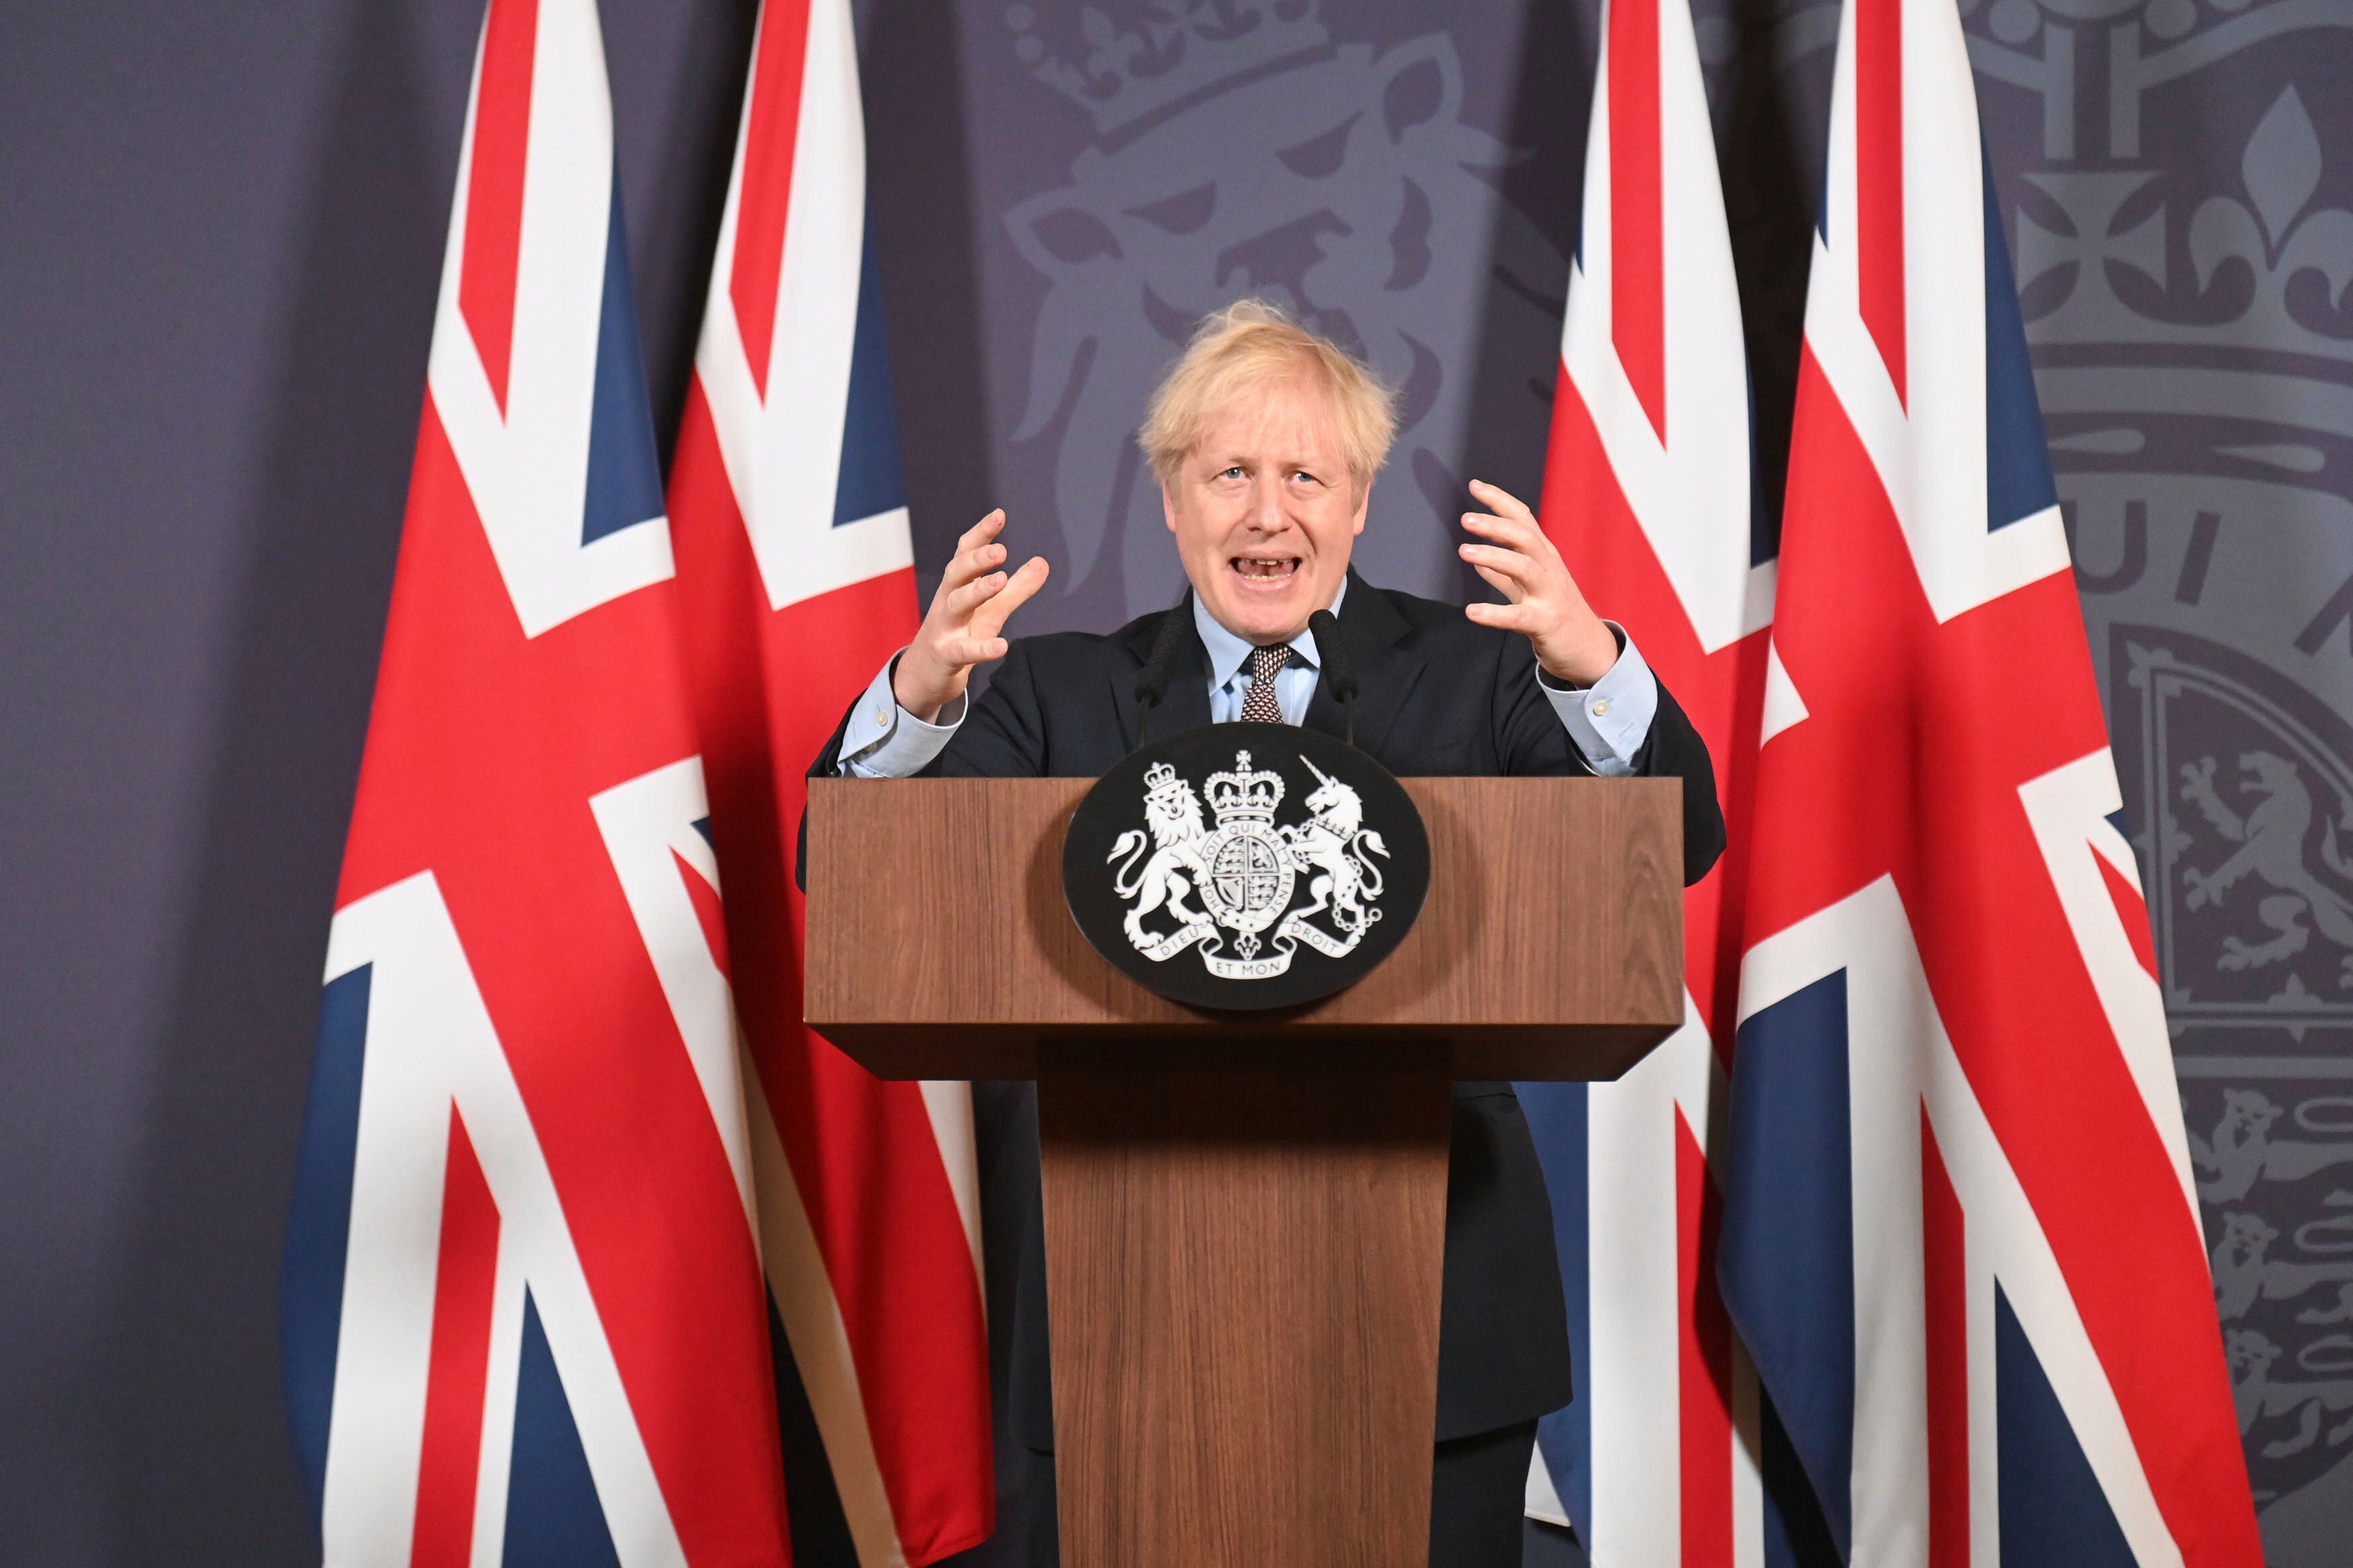 Boris Johnson’s Brexit message played to the UK’s worst, isolationist instincts